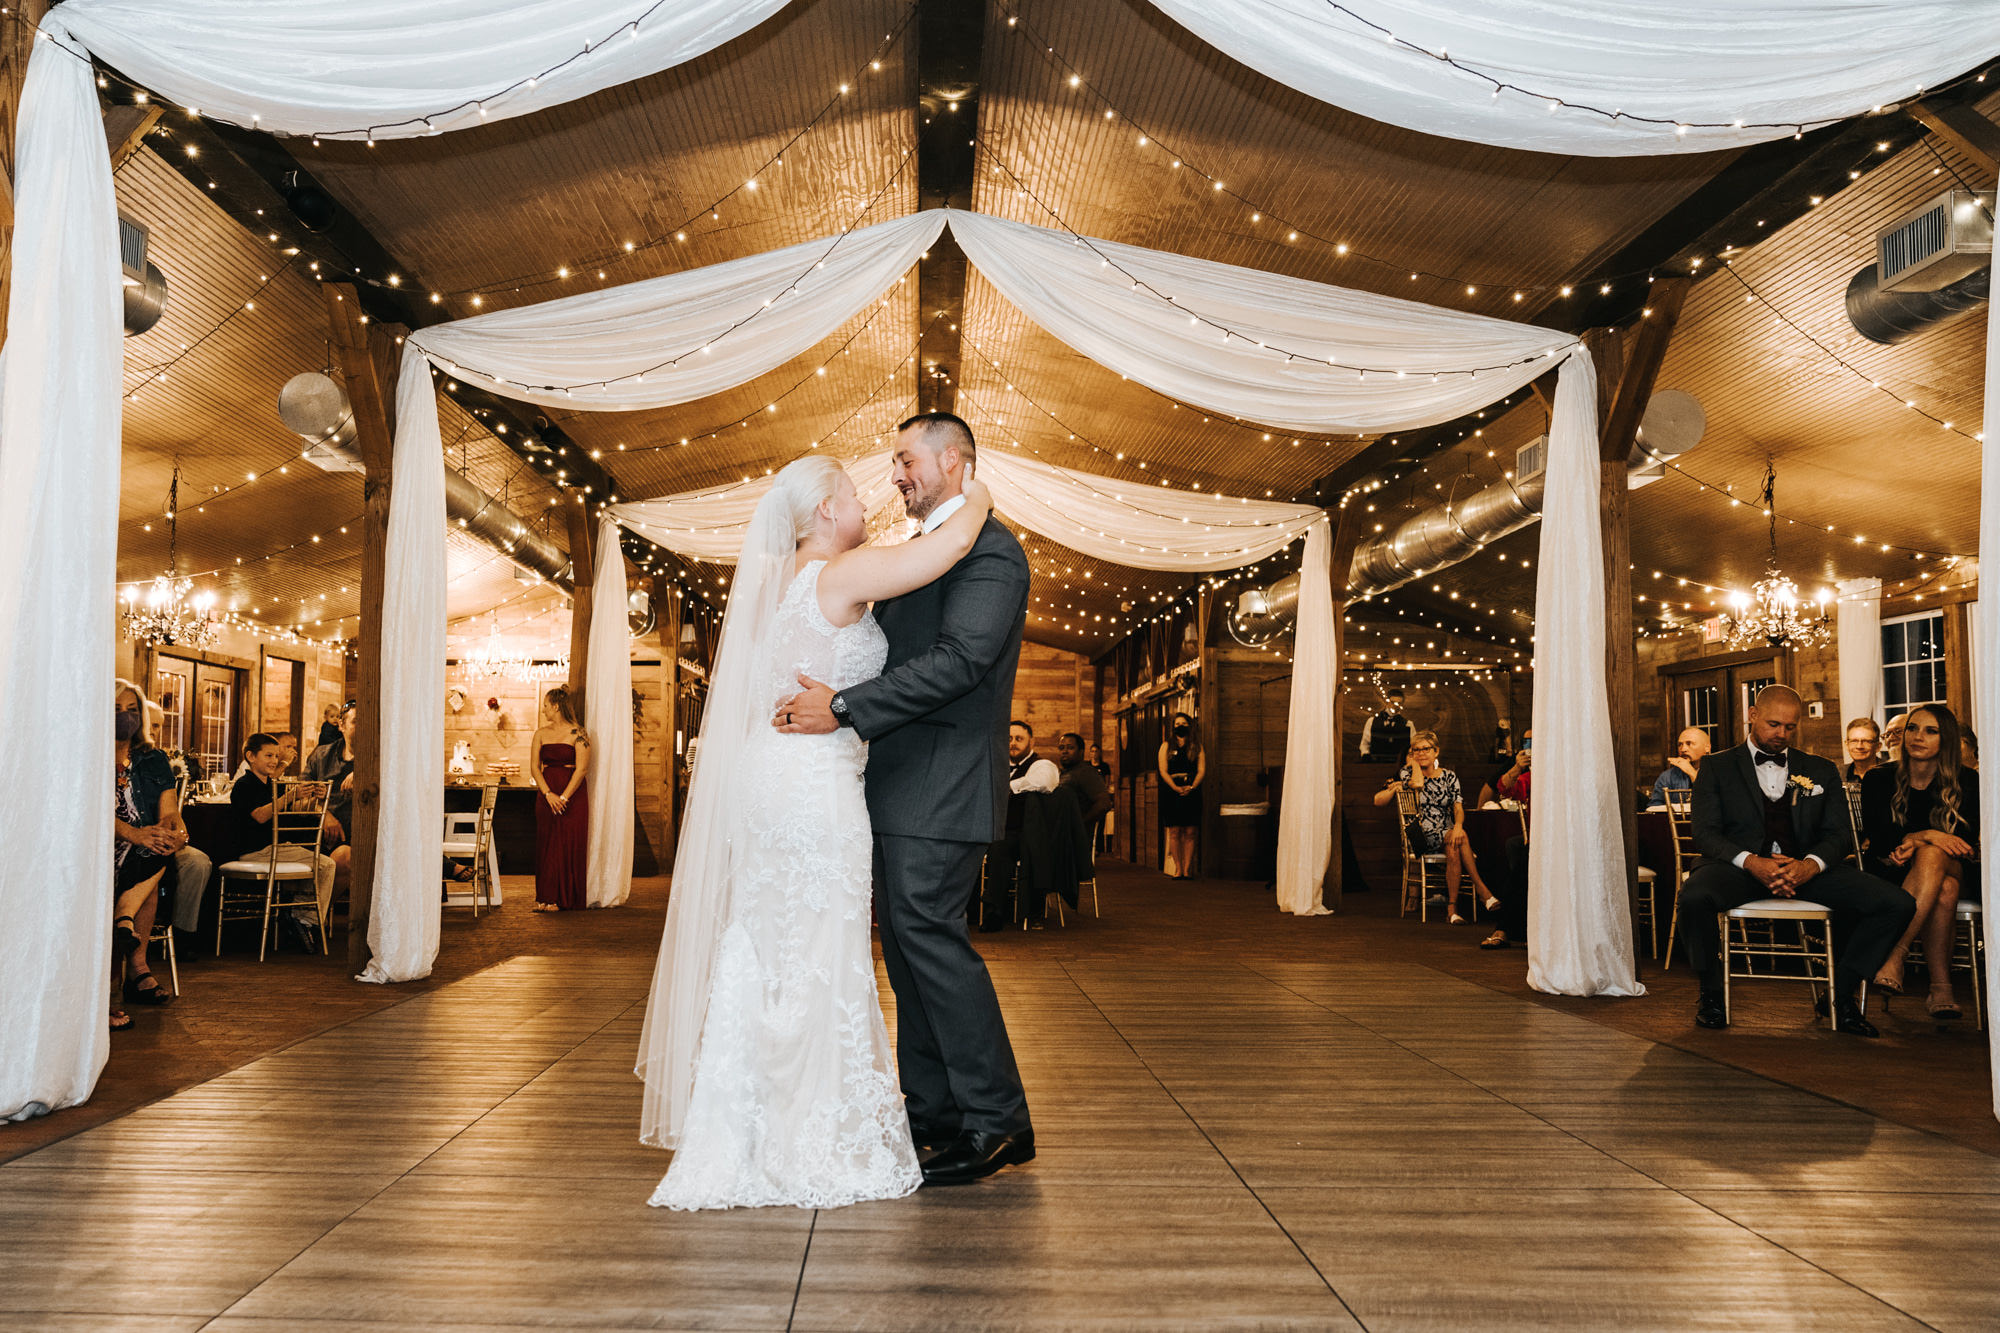 Bride and Groom First Dance during Rustic Dover Wedding Barn Reception with String Lights and Ceiling Draping